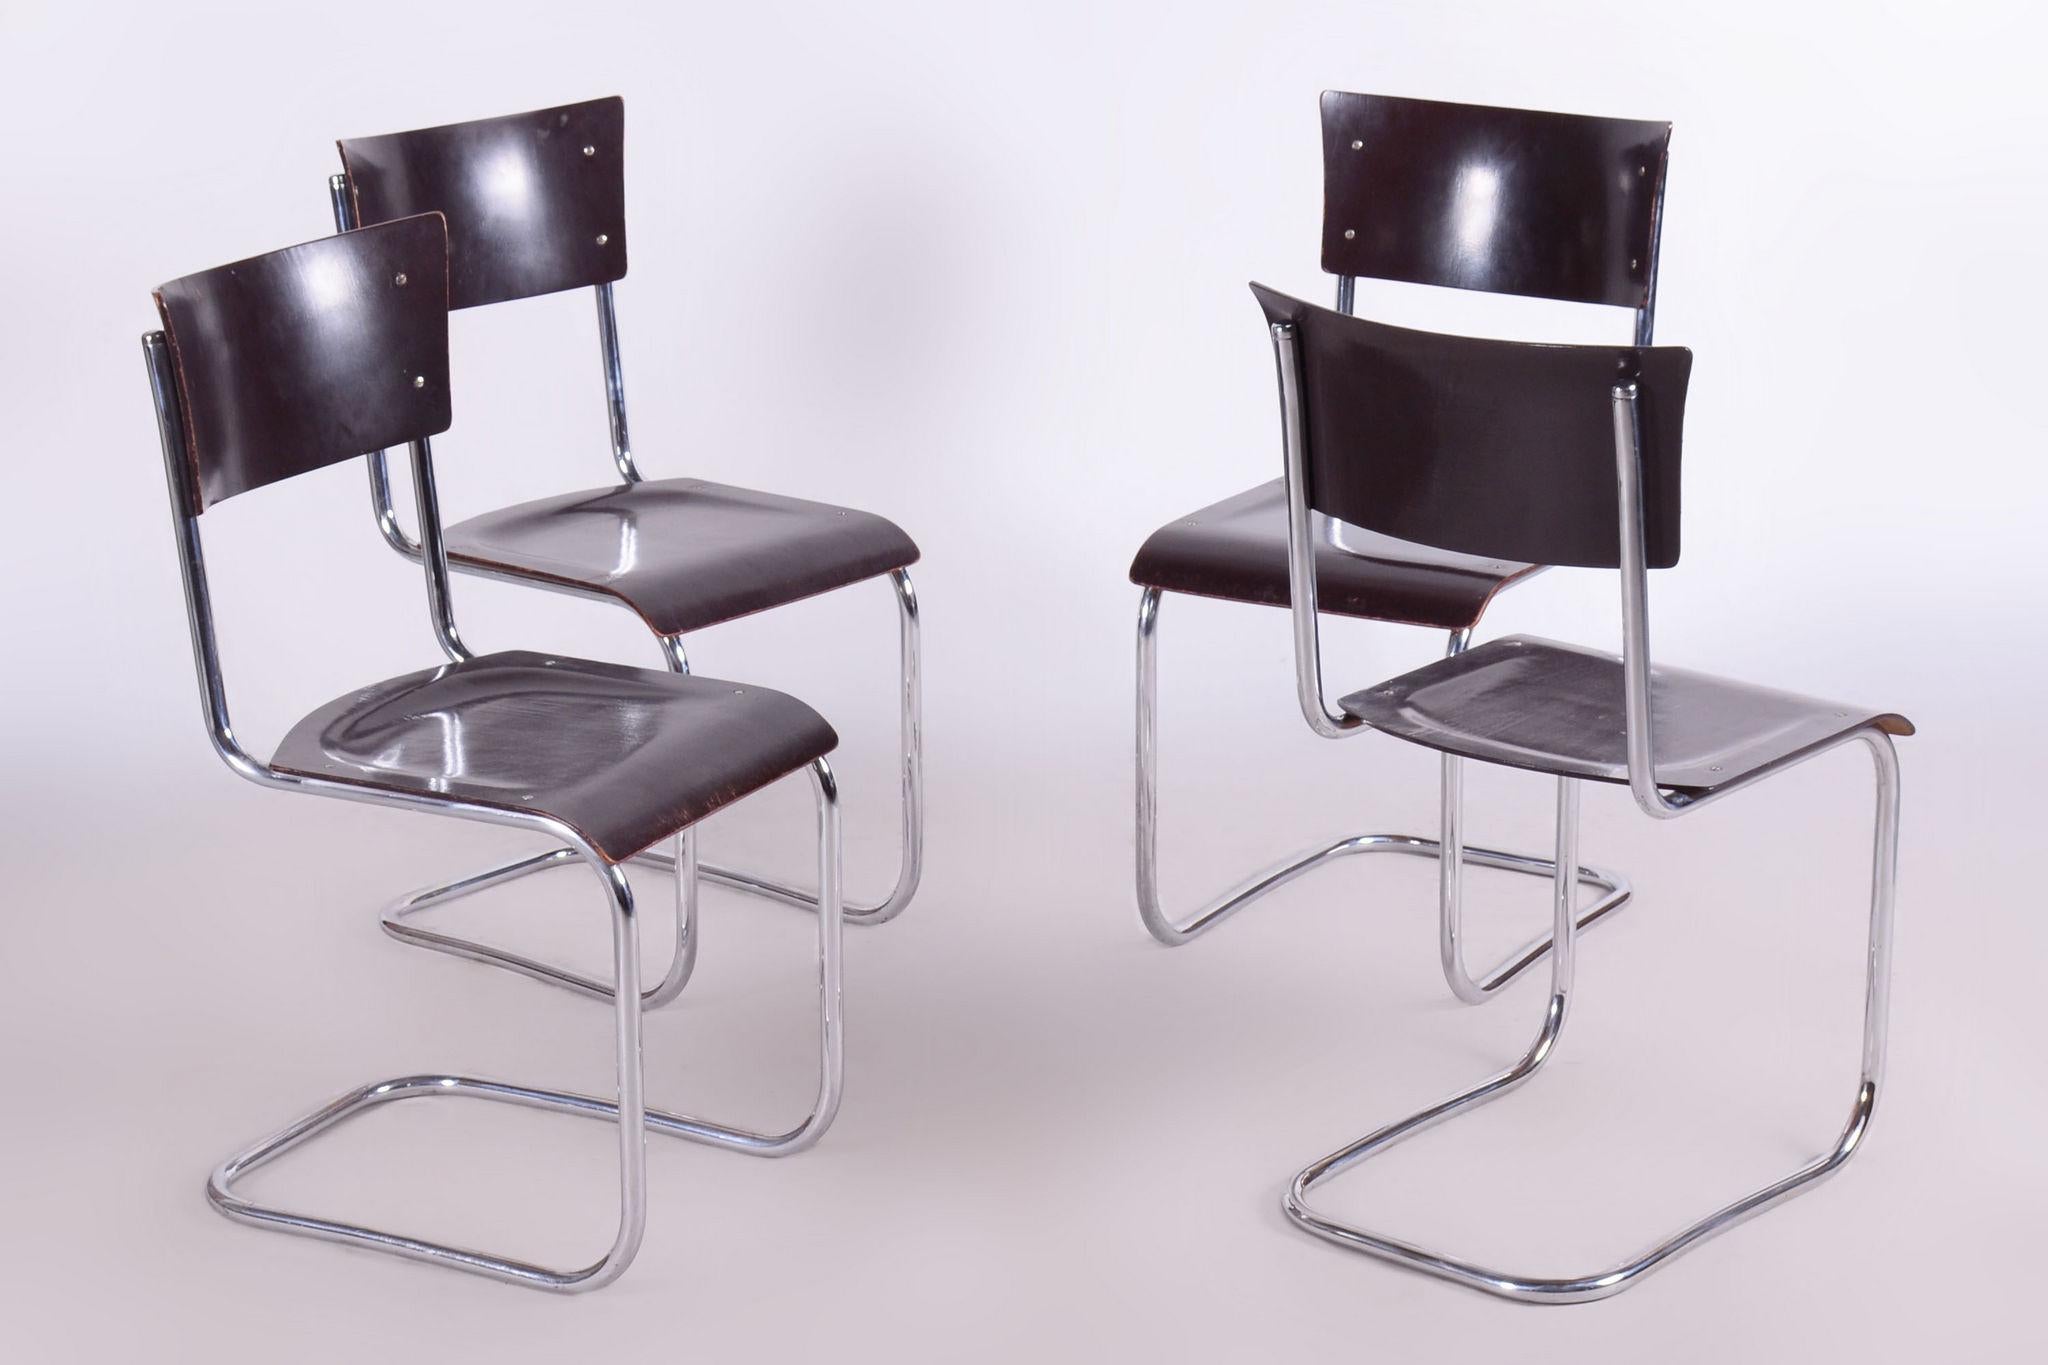 Set of 4 Restored Bauhaus Chairs designed by Mart Stam and made by Robert Slezak.

Designer: Mart Stam
Maker: Robert Slezak
Source: Czechia (Czechoslovakia)
Period: 1930-1939
Material:  Chome-Plated Steel
Revived polish.
The chrome parts have been